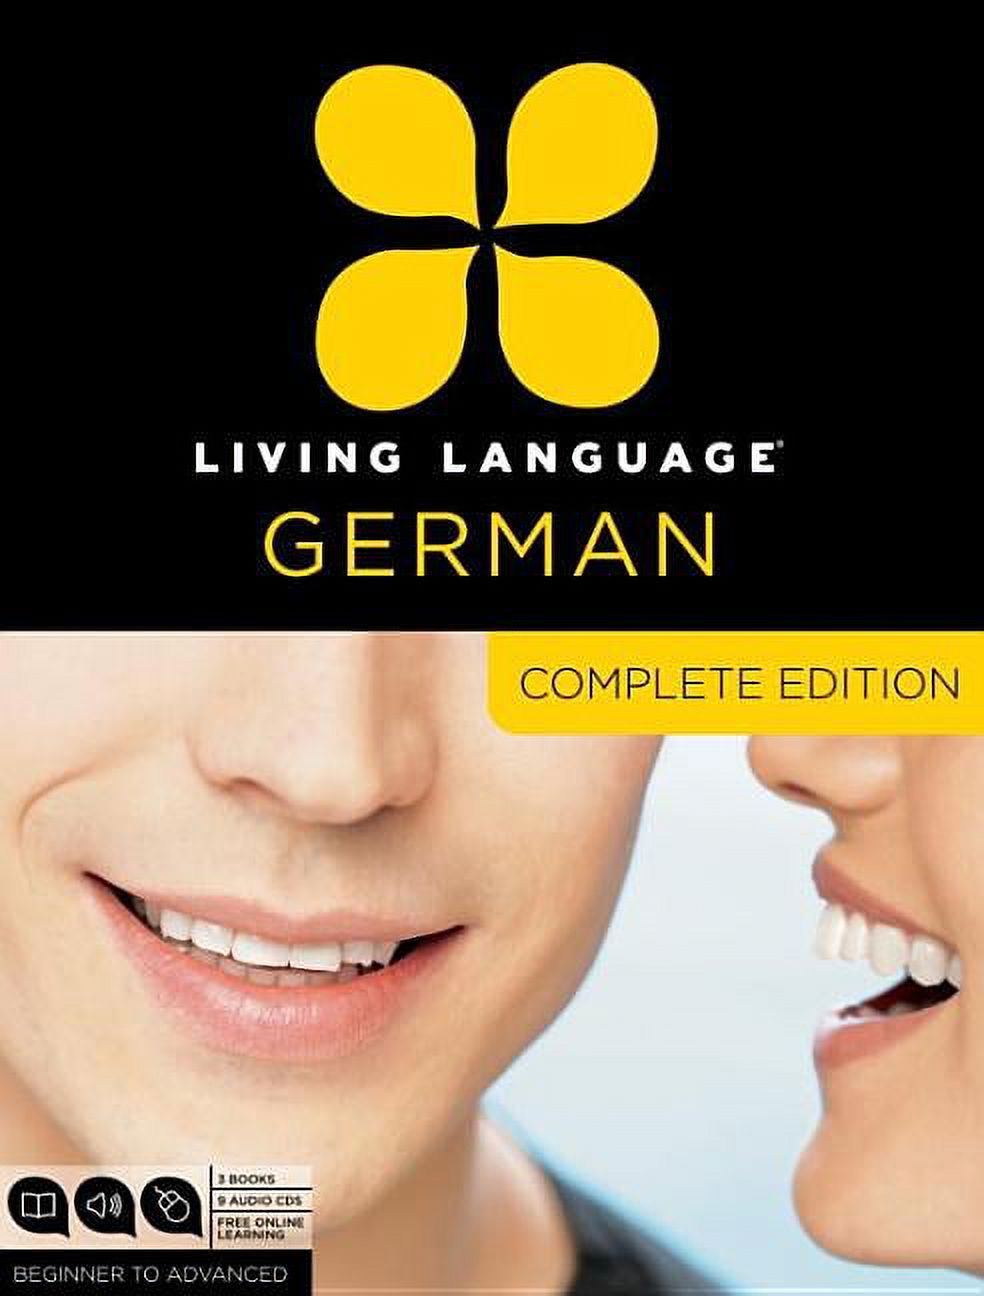 Coursebooks,　Living　Advanced　Beginner　Including　Language　and　German,　Complete　Cds,　Edition:　Through　Audio　Course,　Fr